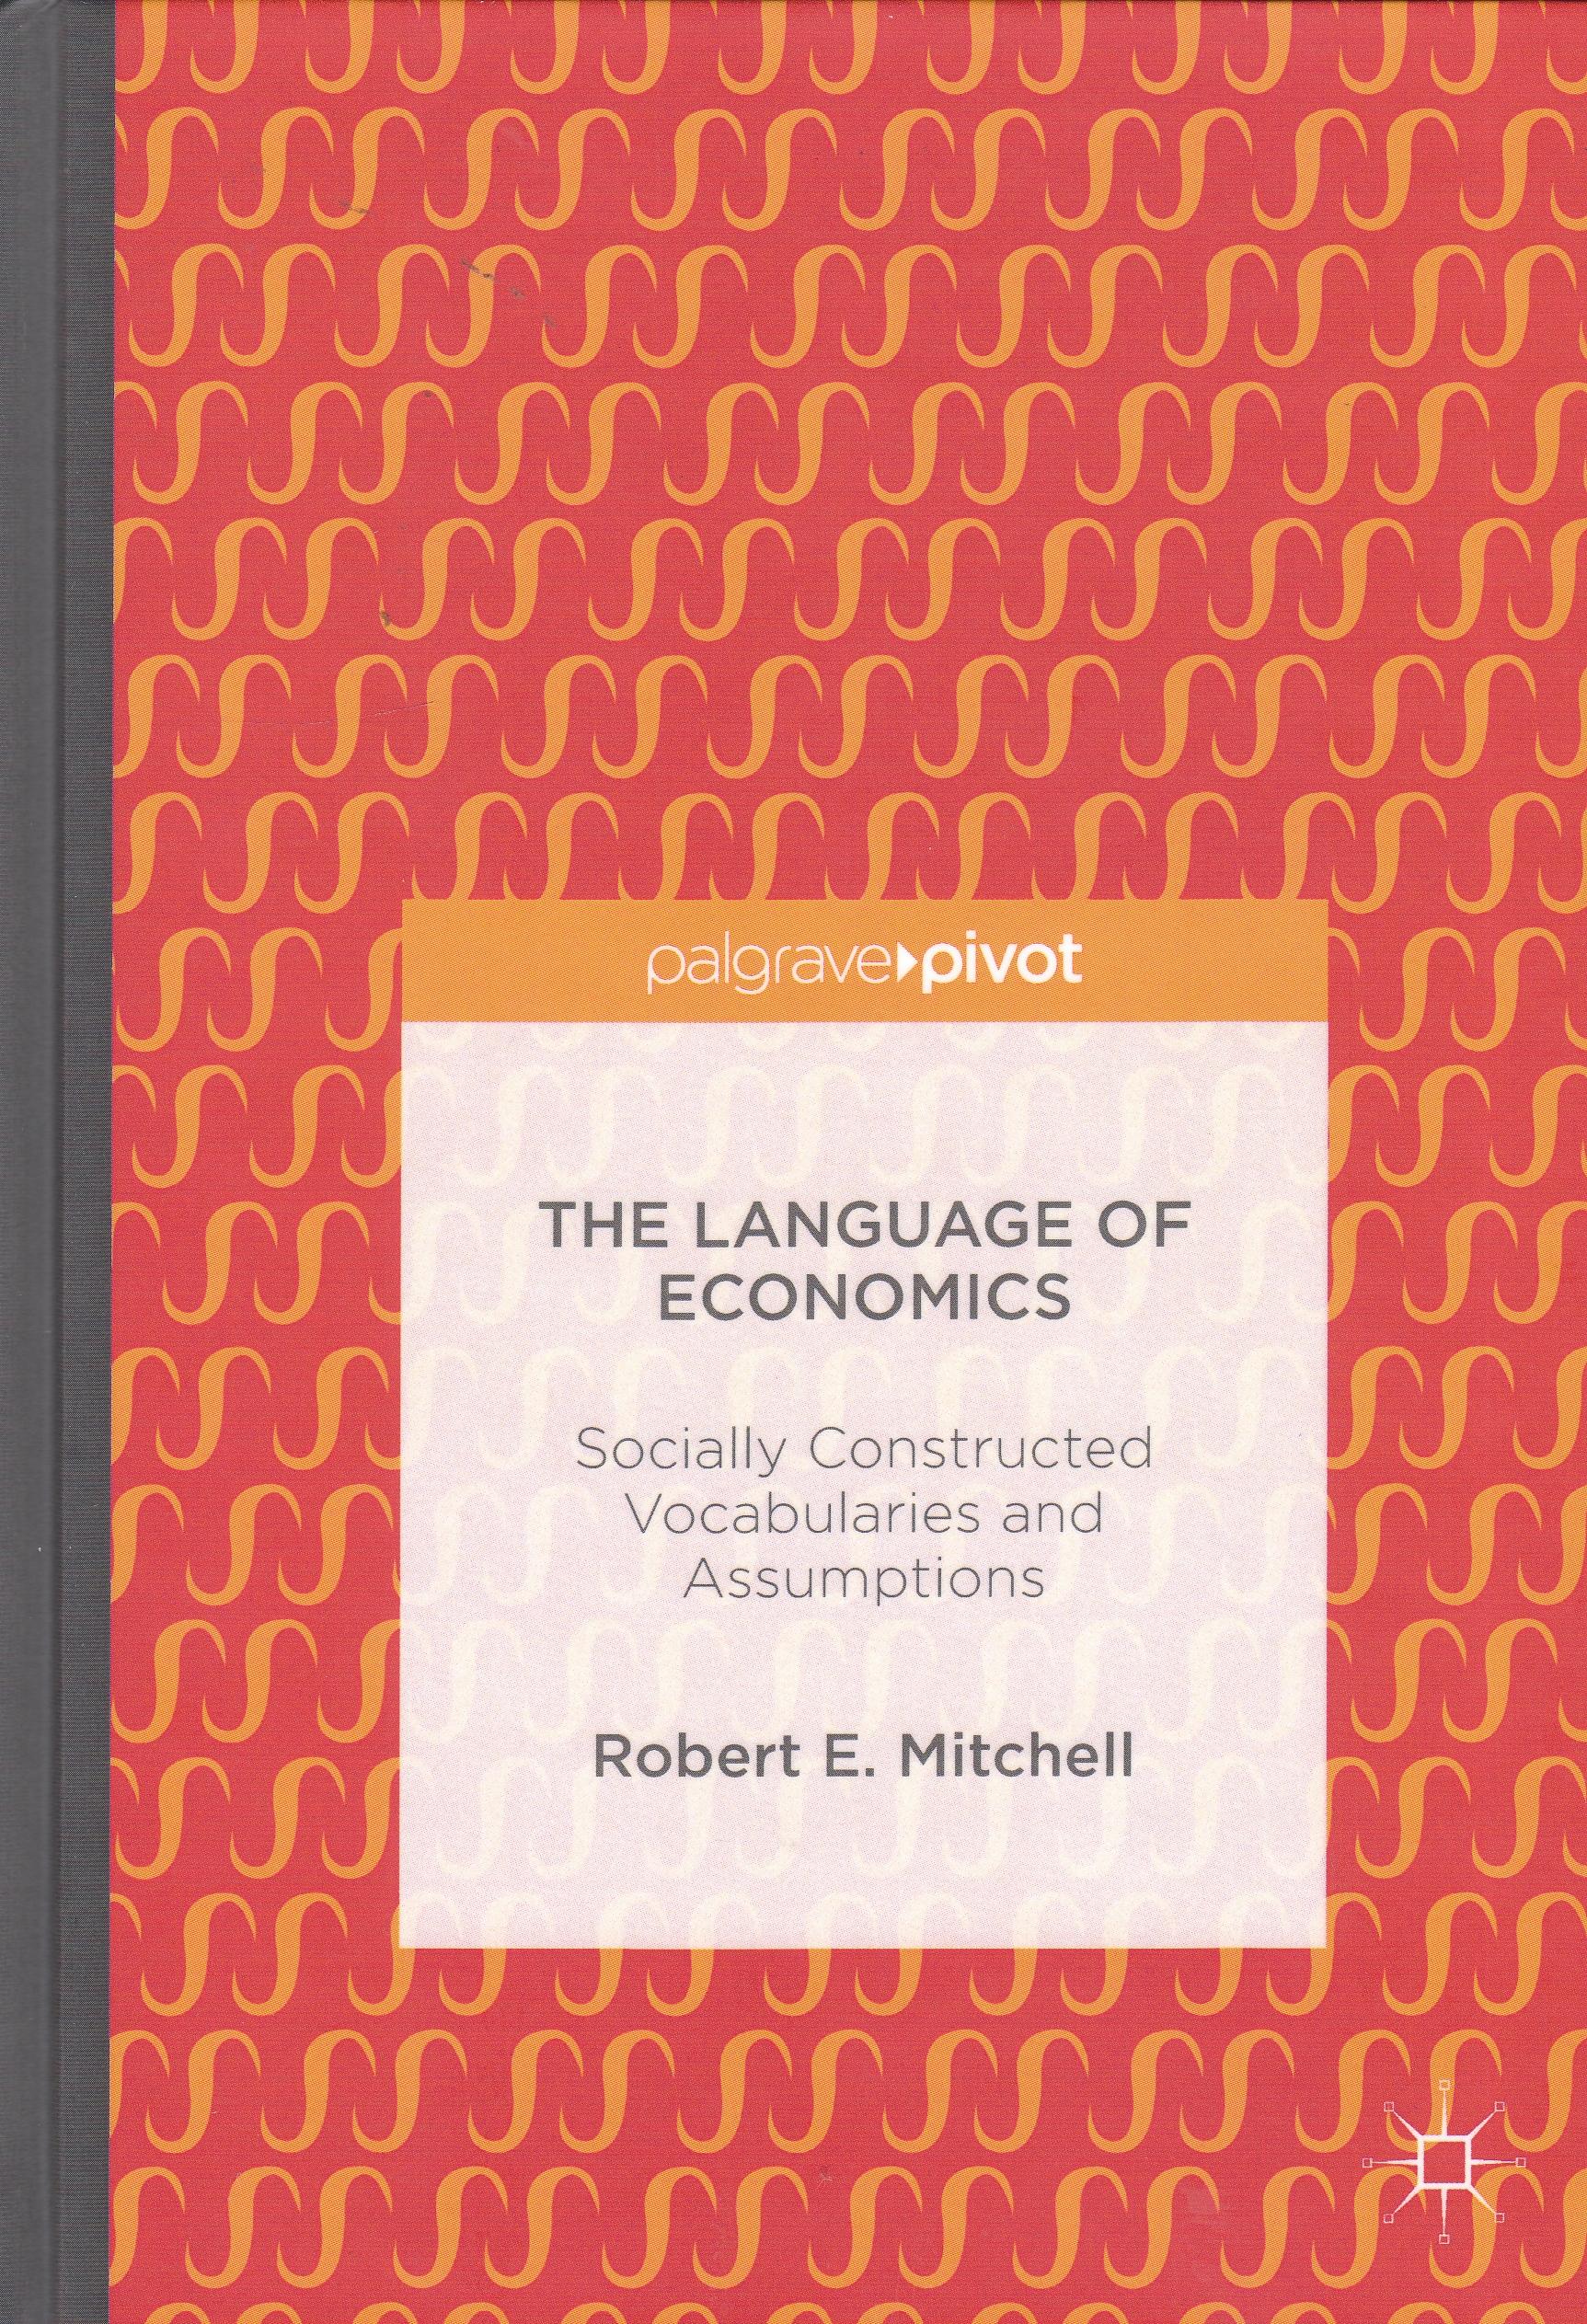 The Language of Economics  "Socially Constructed Vocabularies and Assumptions"